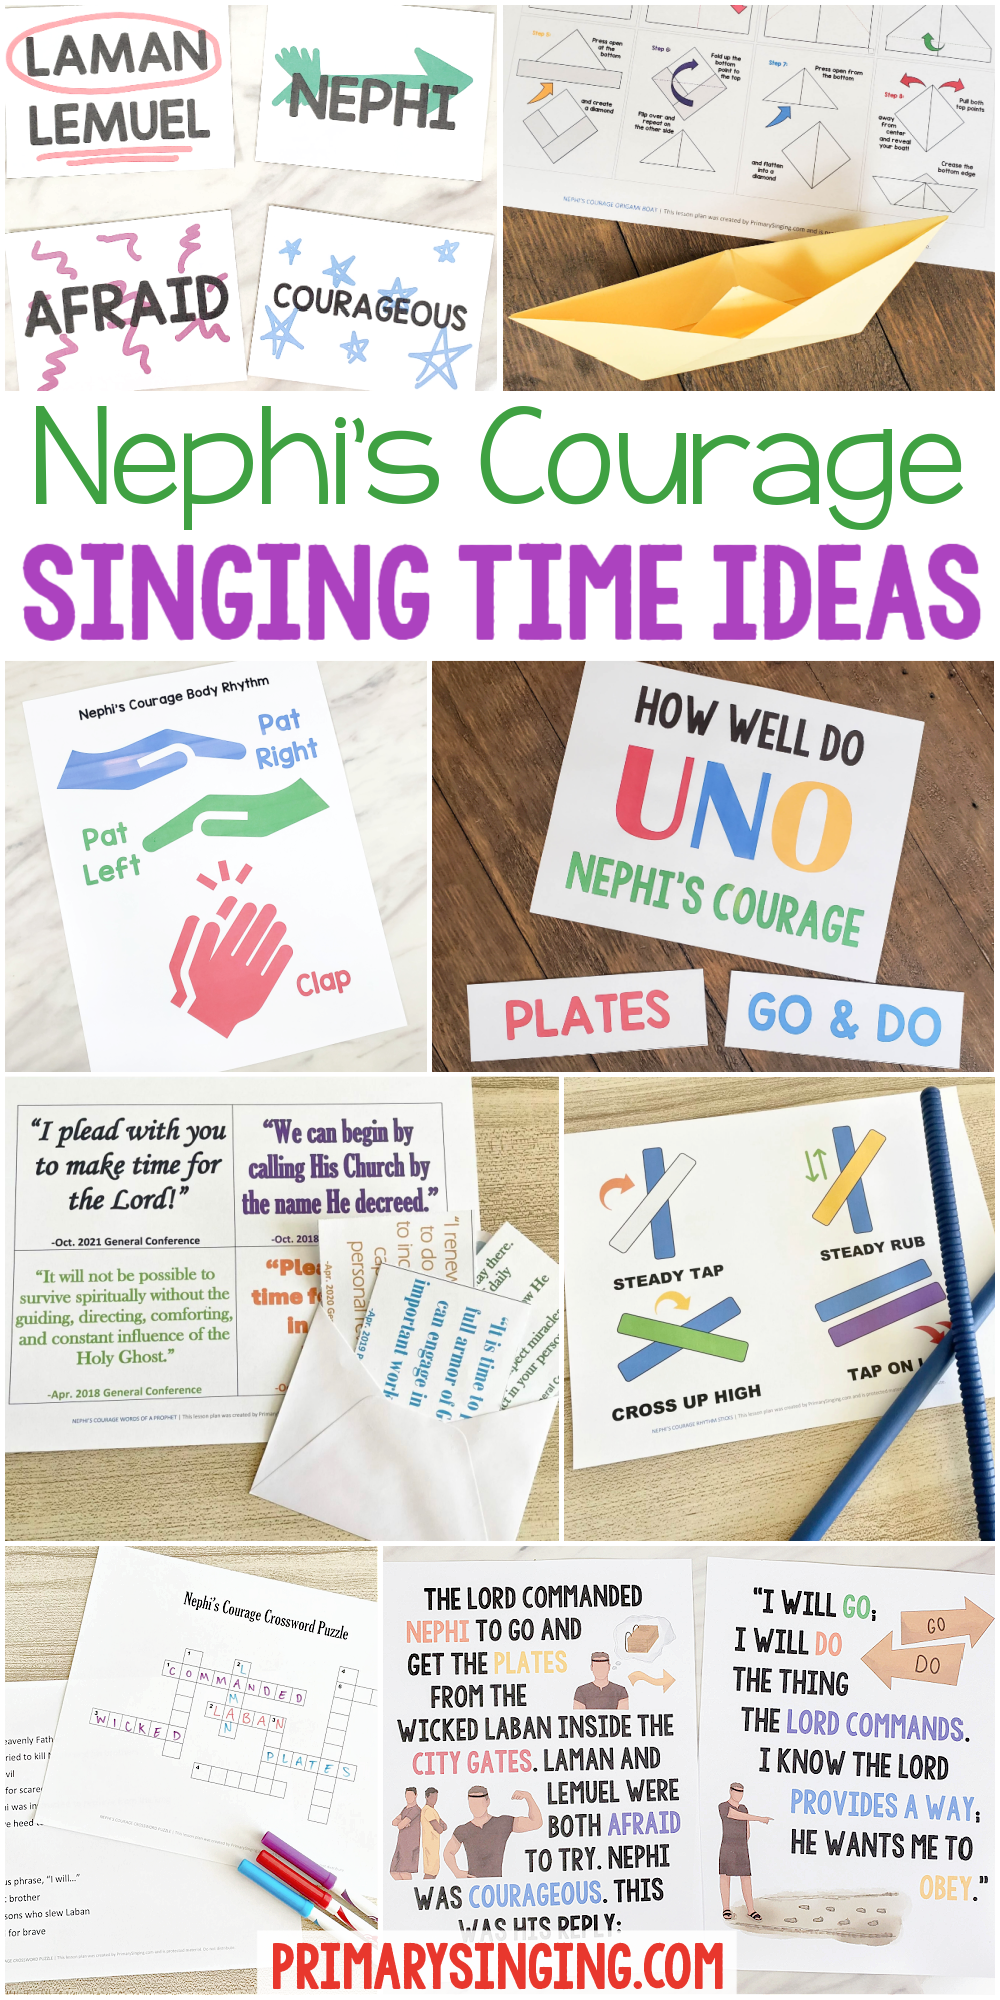 Nephi's Courage Singing Time Ideas - Lots of fun ways to teach this Primary song including build an origami boat, word map, hand actions, UNO review, rhythm sticks, art flip chart and many more! A great resource list for LDS Primary music leaders.